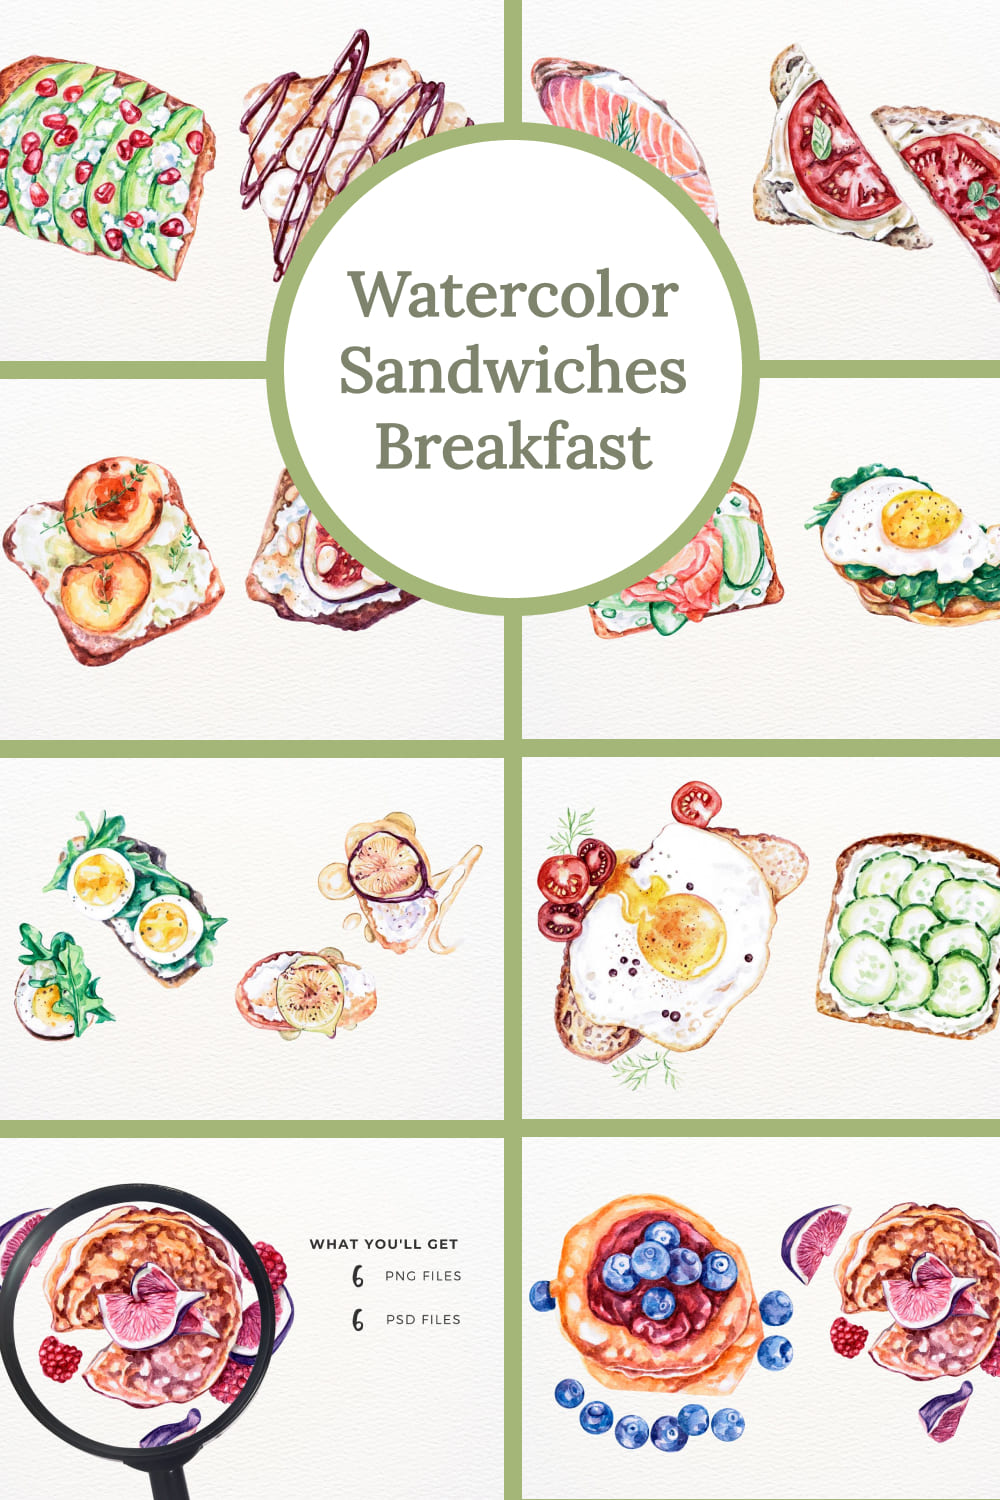 Watercolor sandwiches breakfast - pinterest image preview.